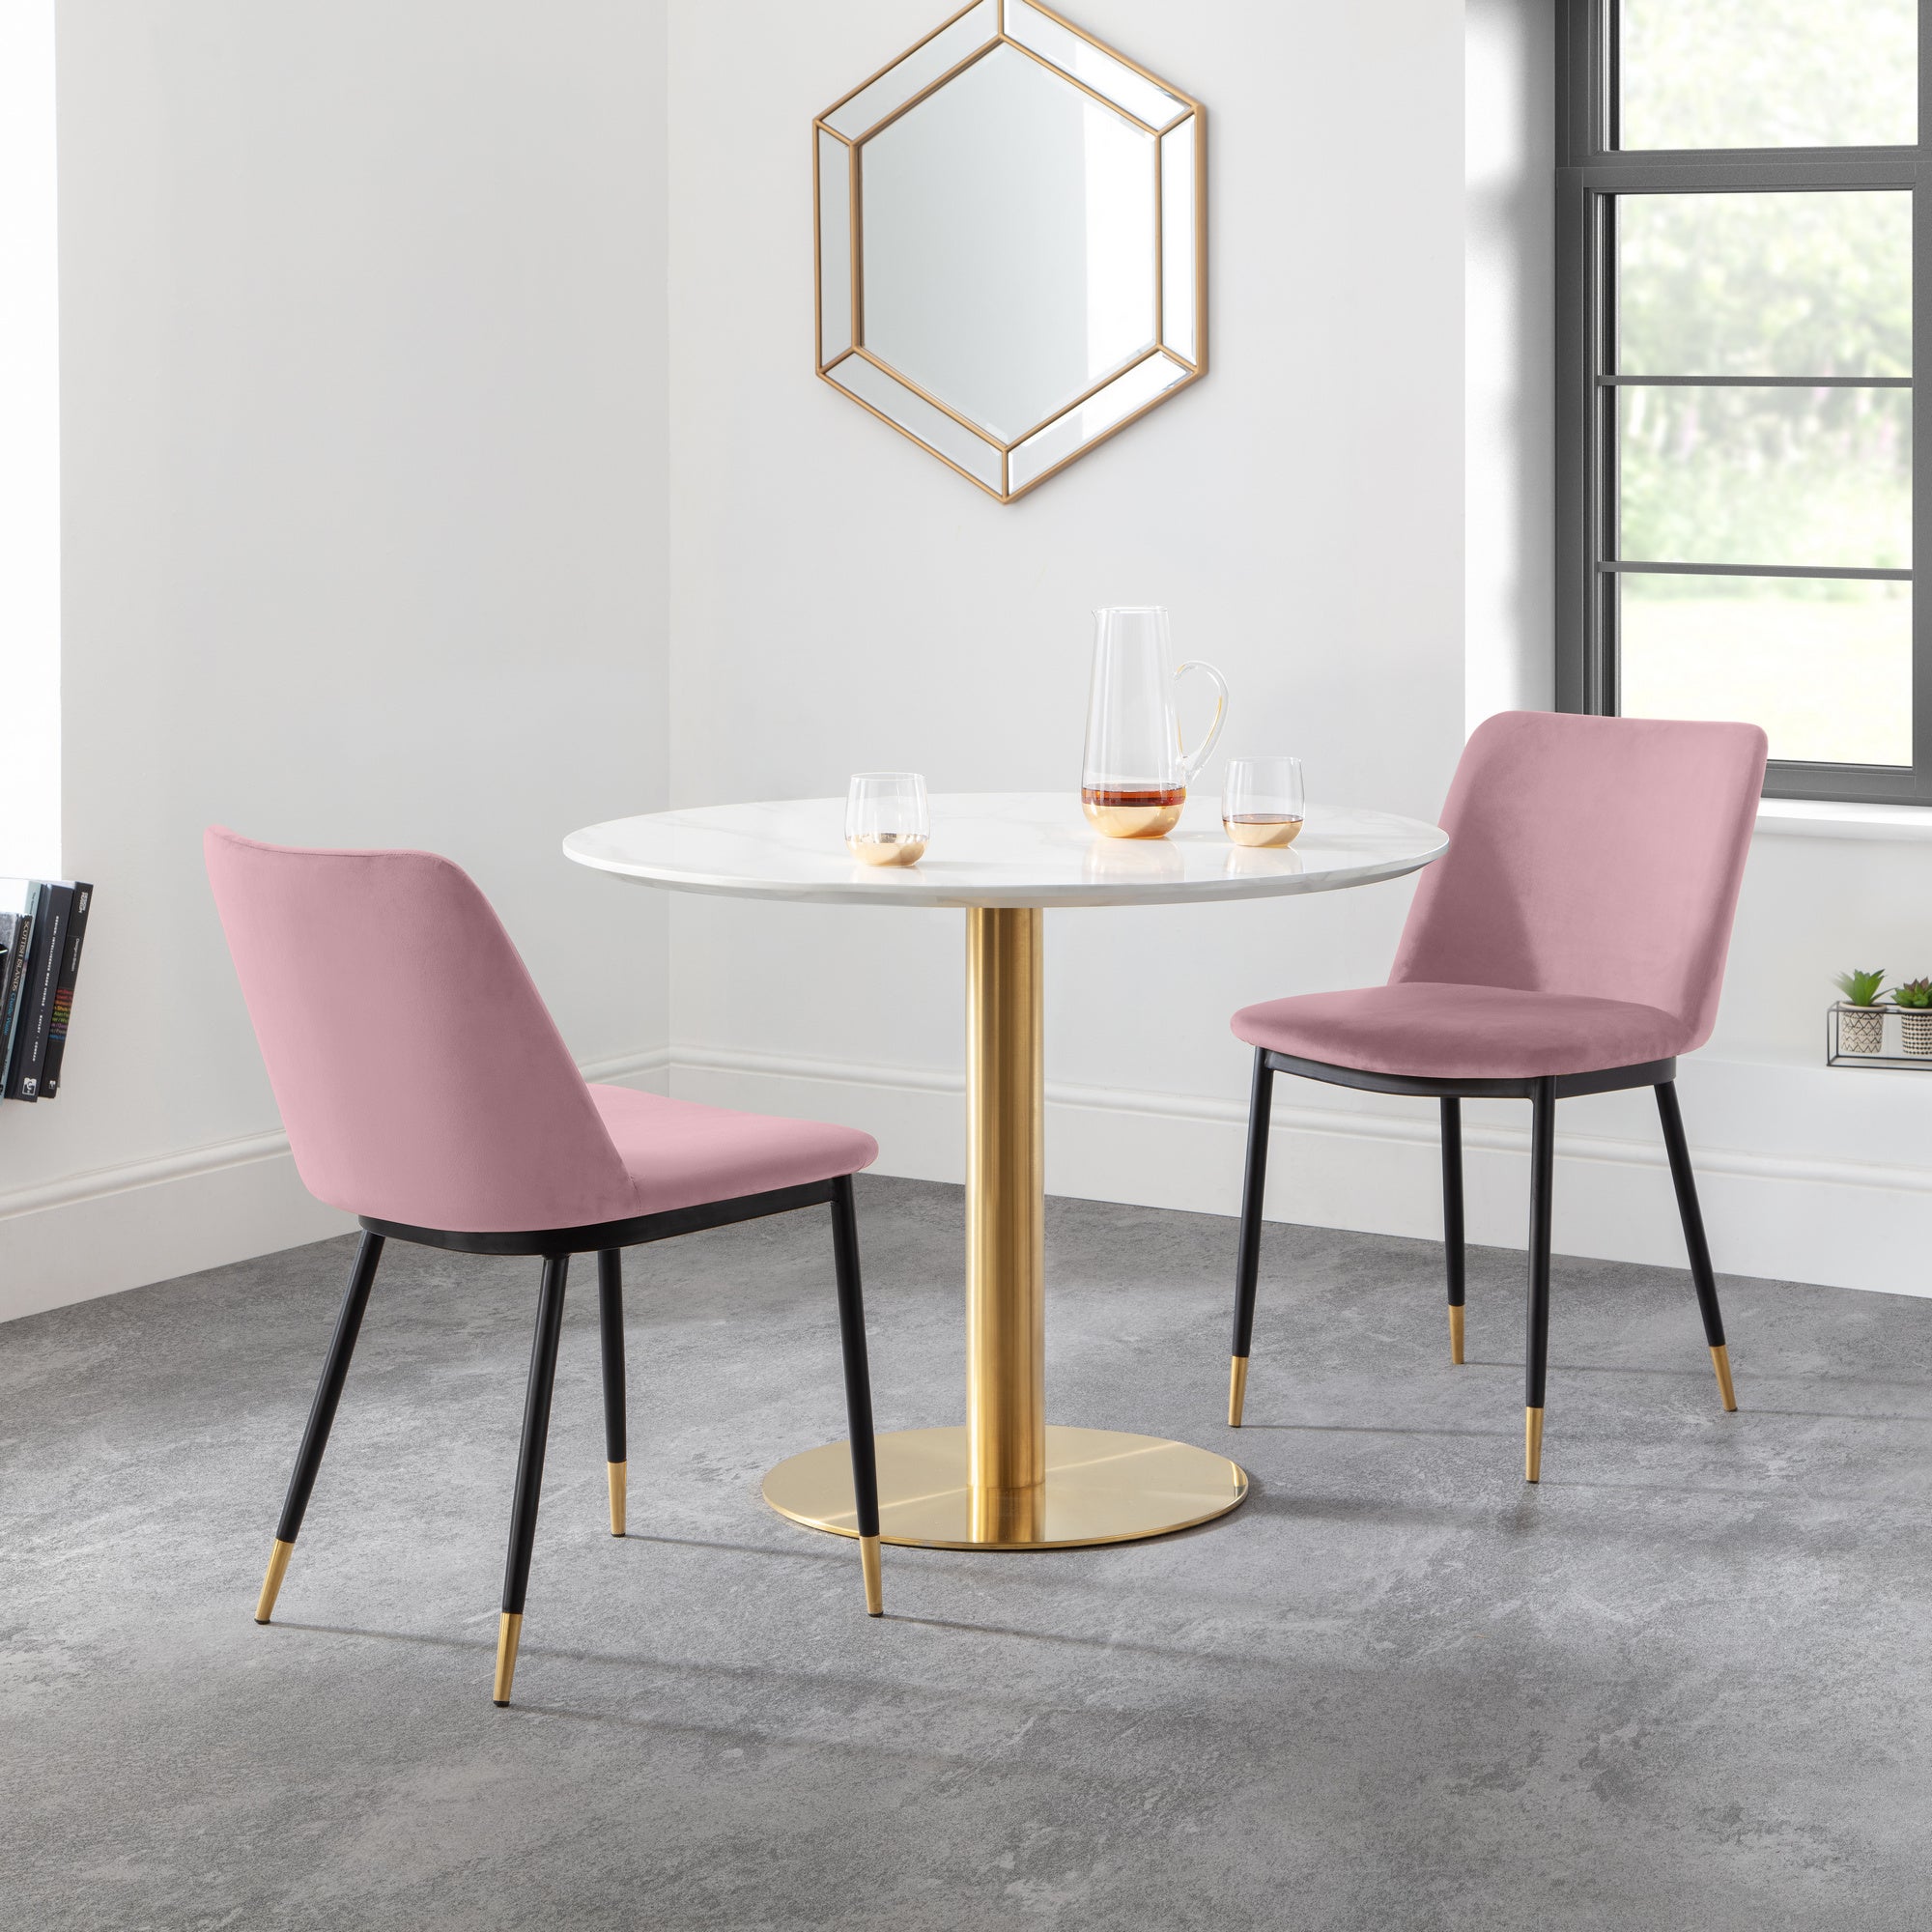 Palermo Round Dining Table With 2 Delaunay Chairs Pink